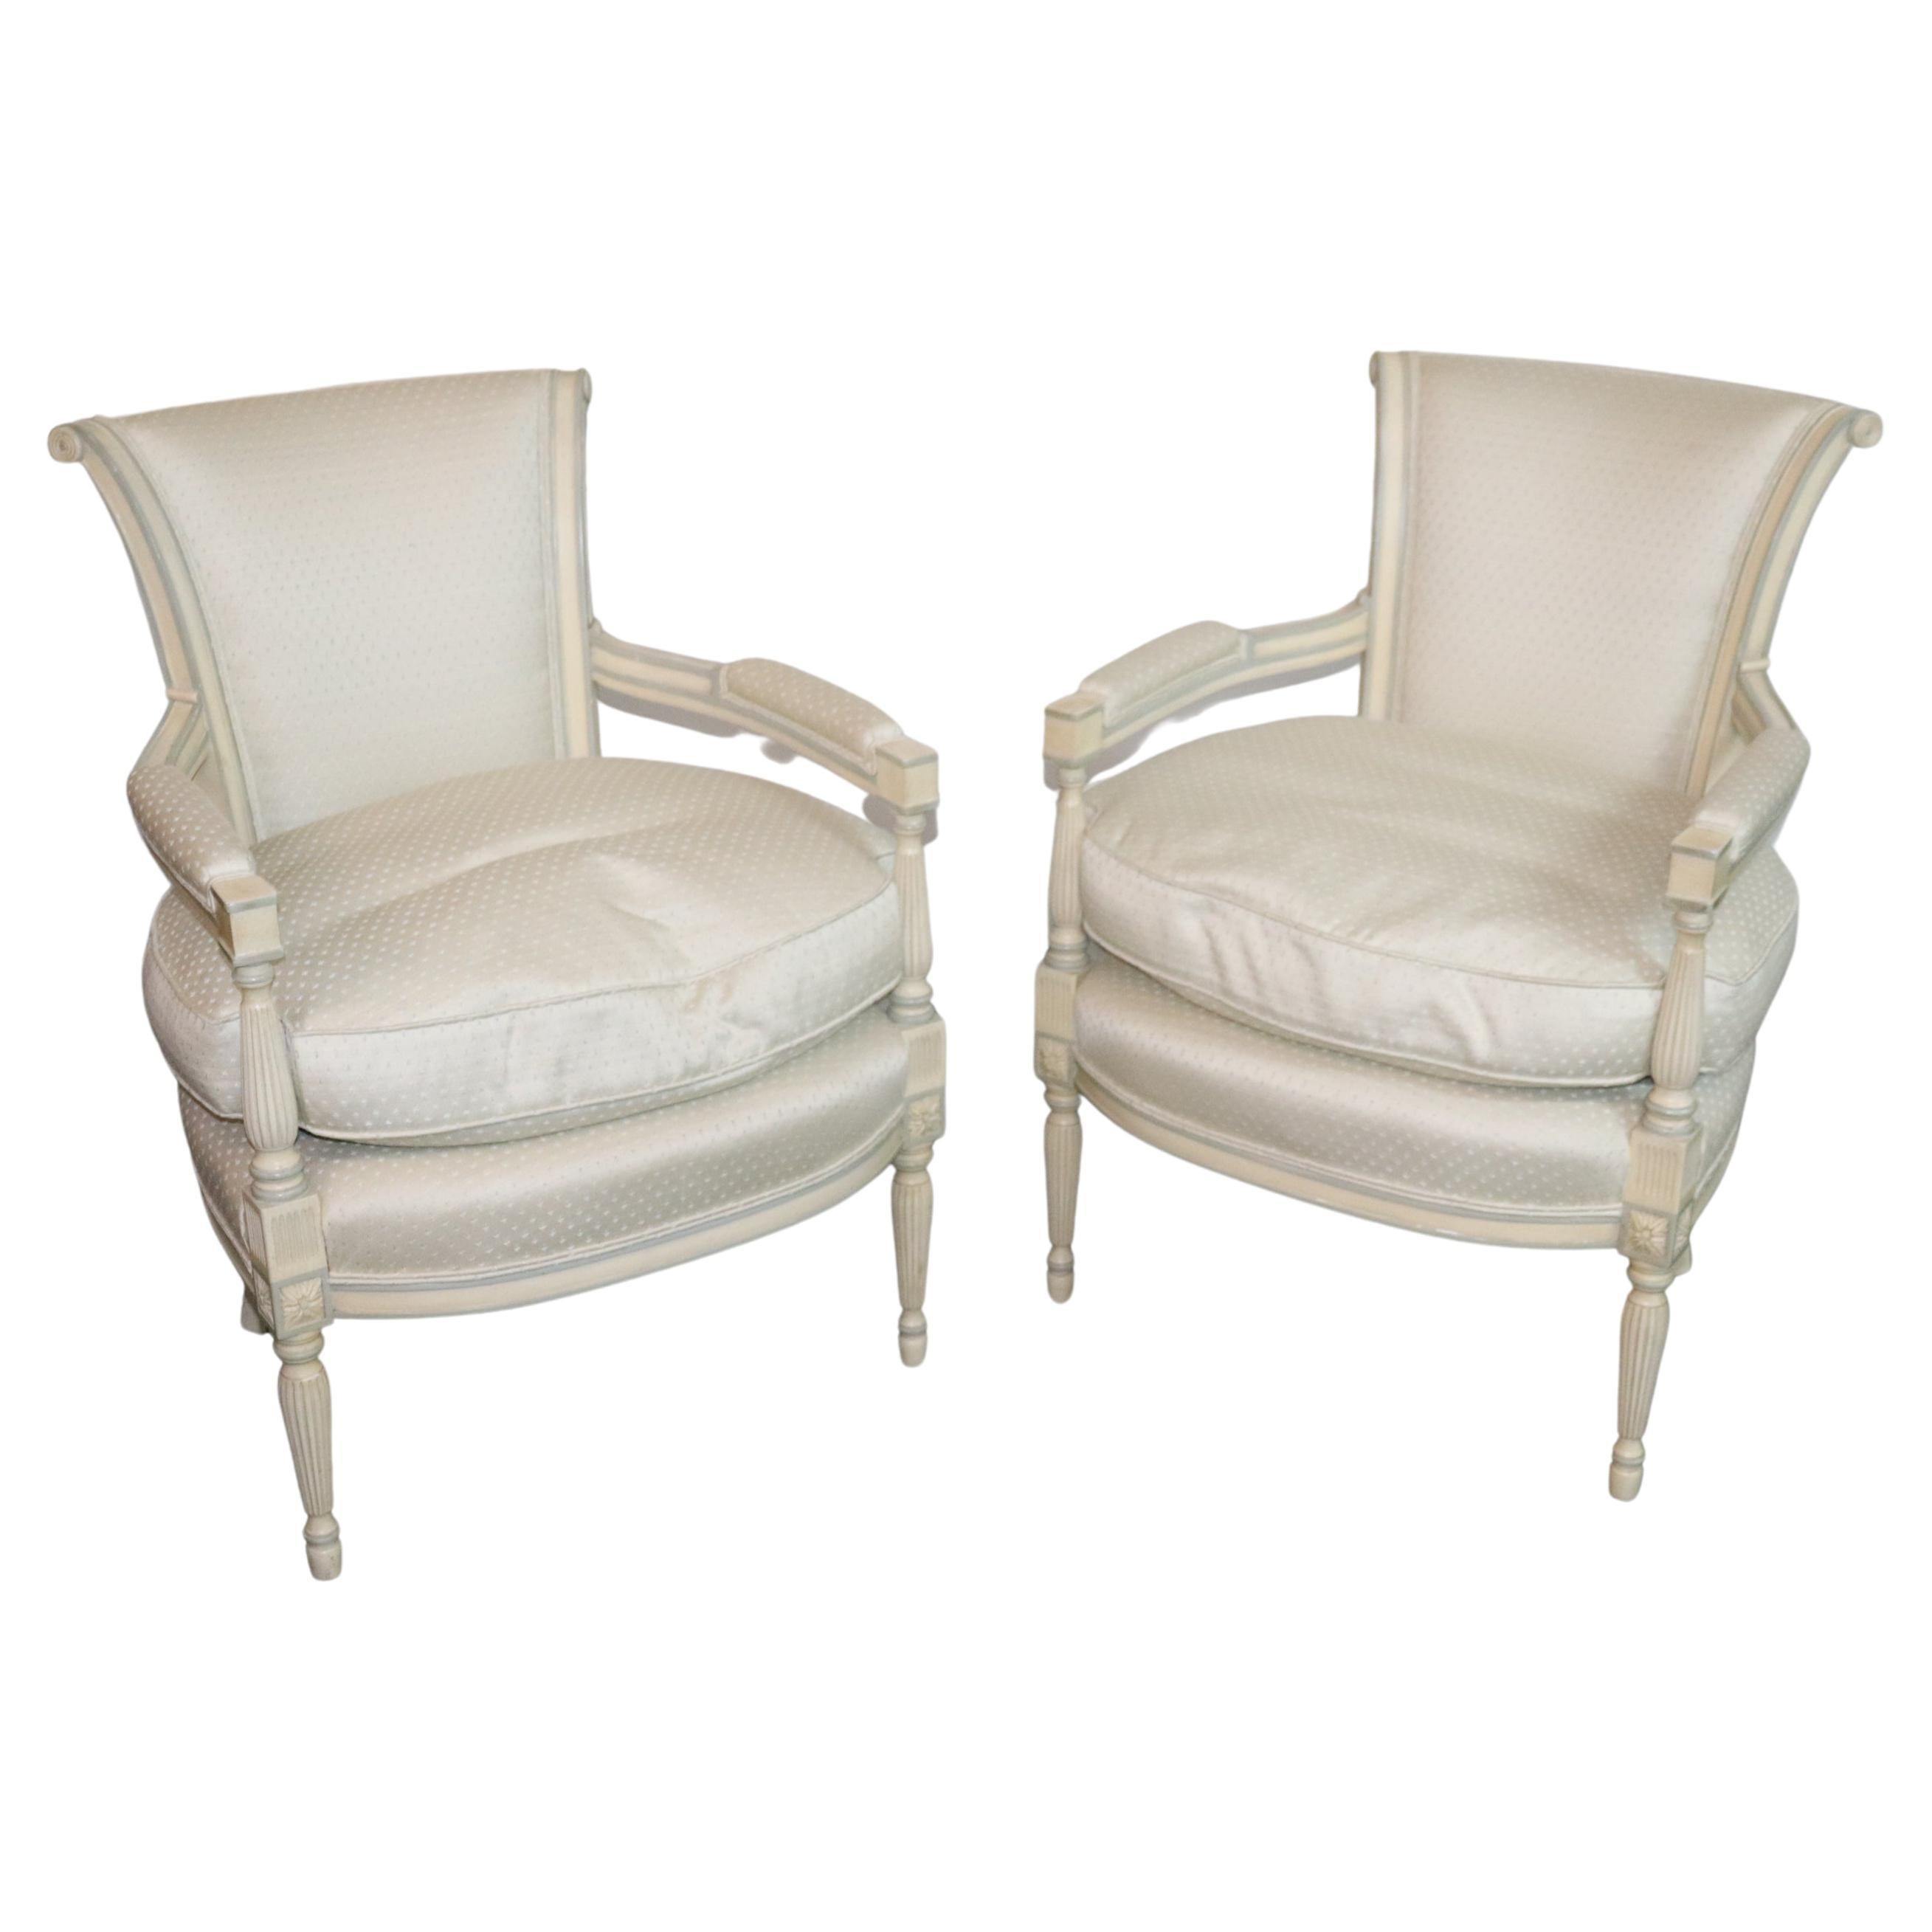 Soft Blue and White Painted French Directoire Style Medium Size Armchairs